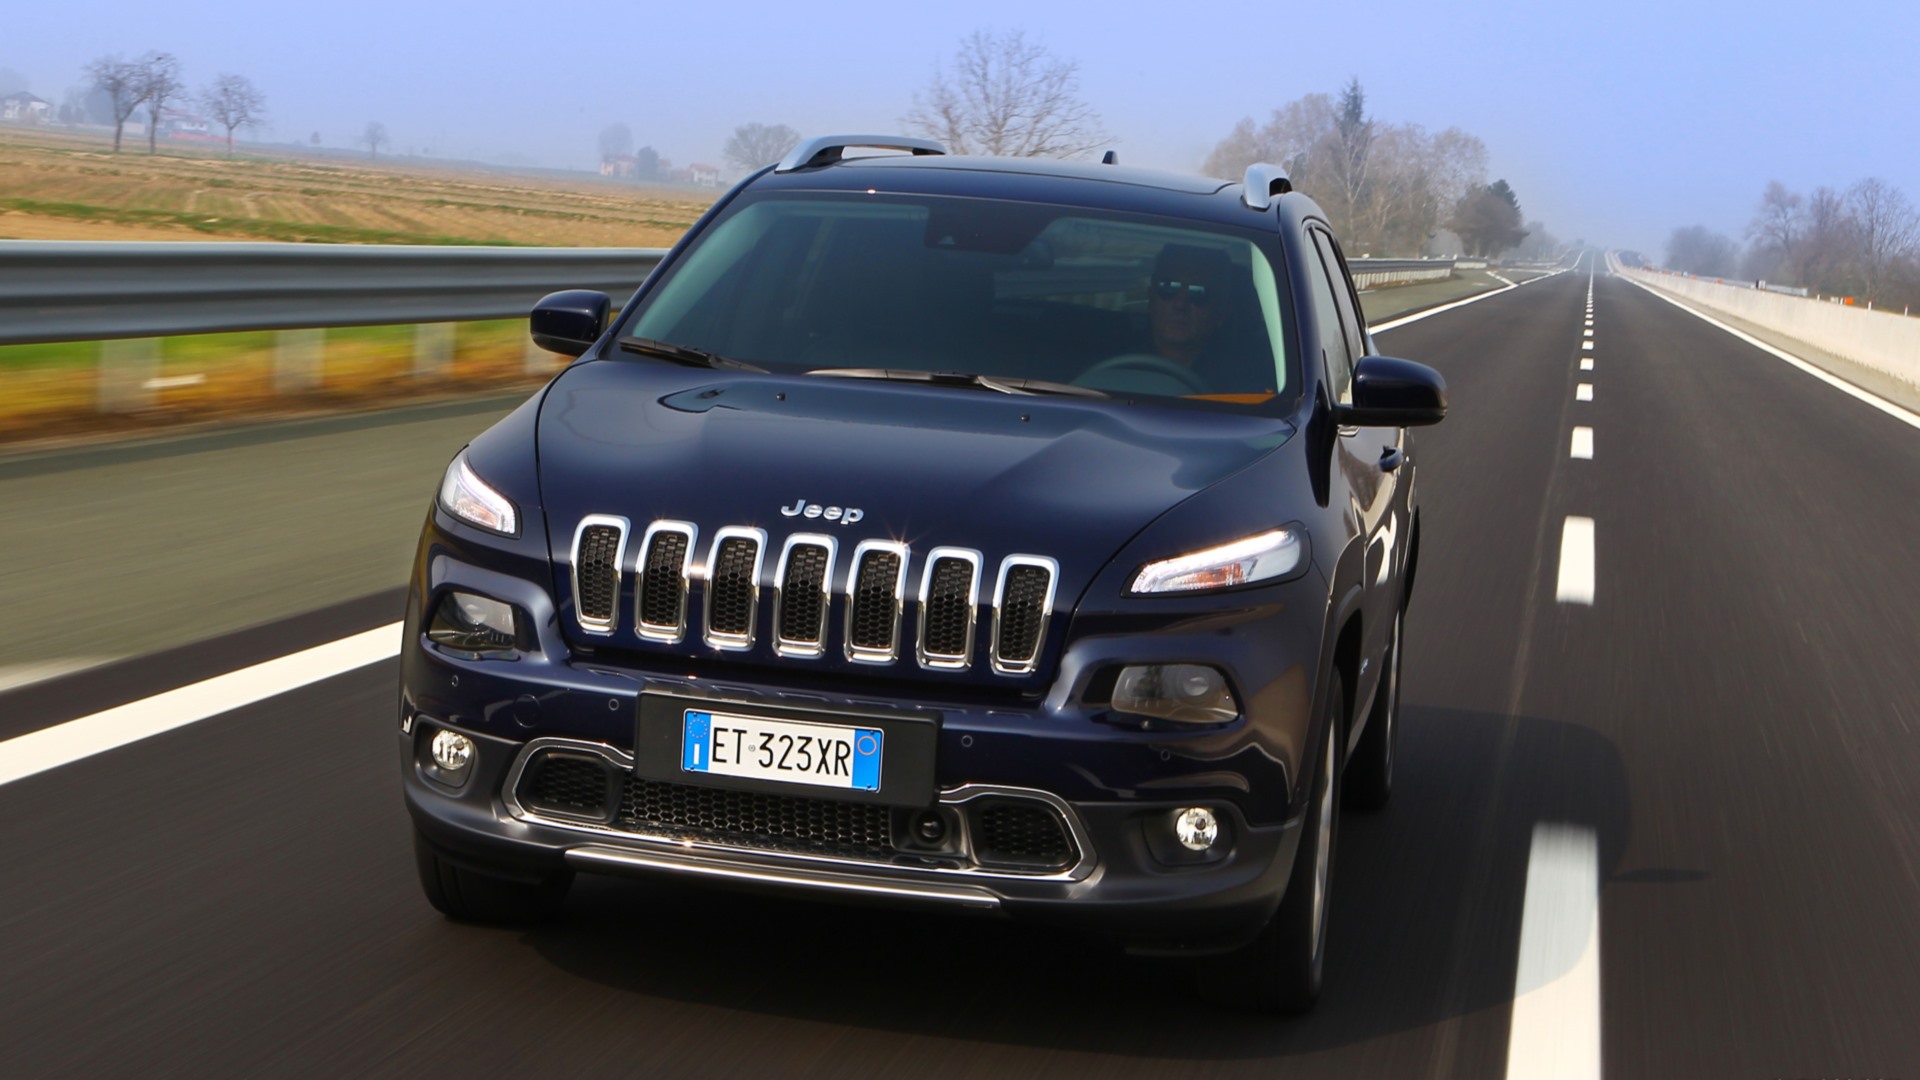 Vehicles Jeep Cherokee HD Wallpaper | Background Image